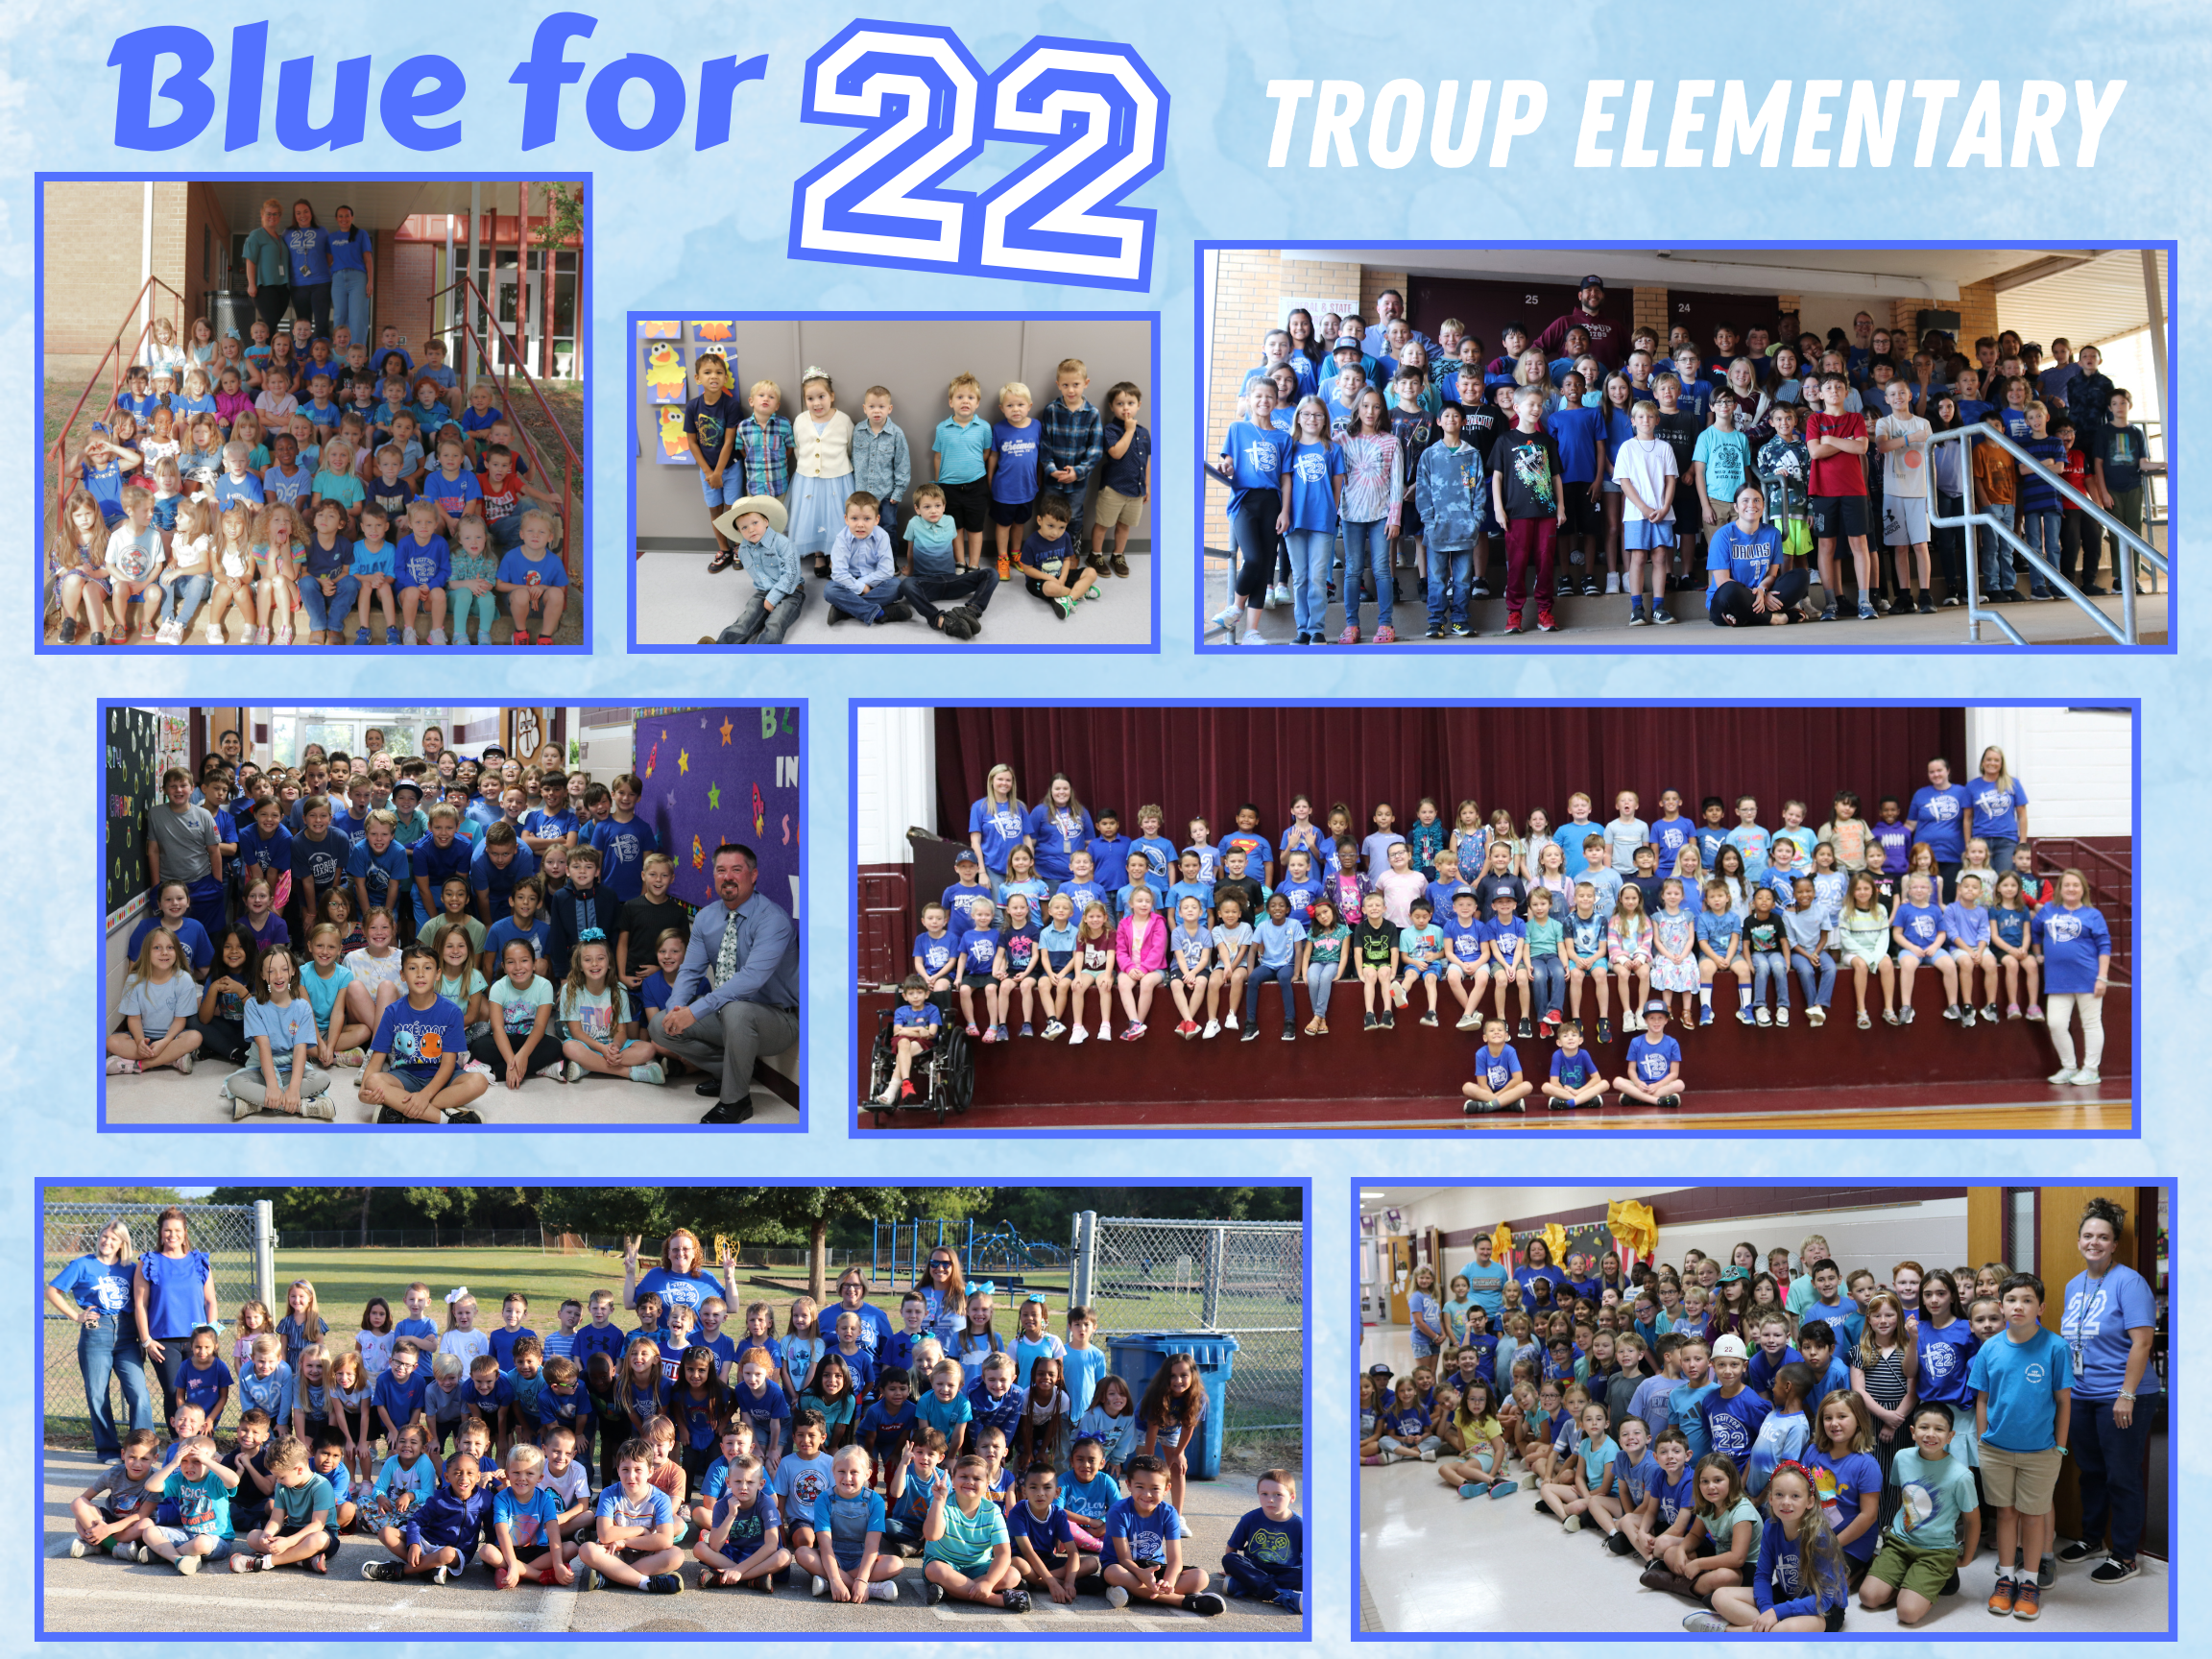 Troup Elementary Blue for 22